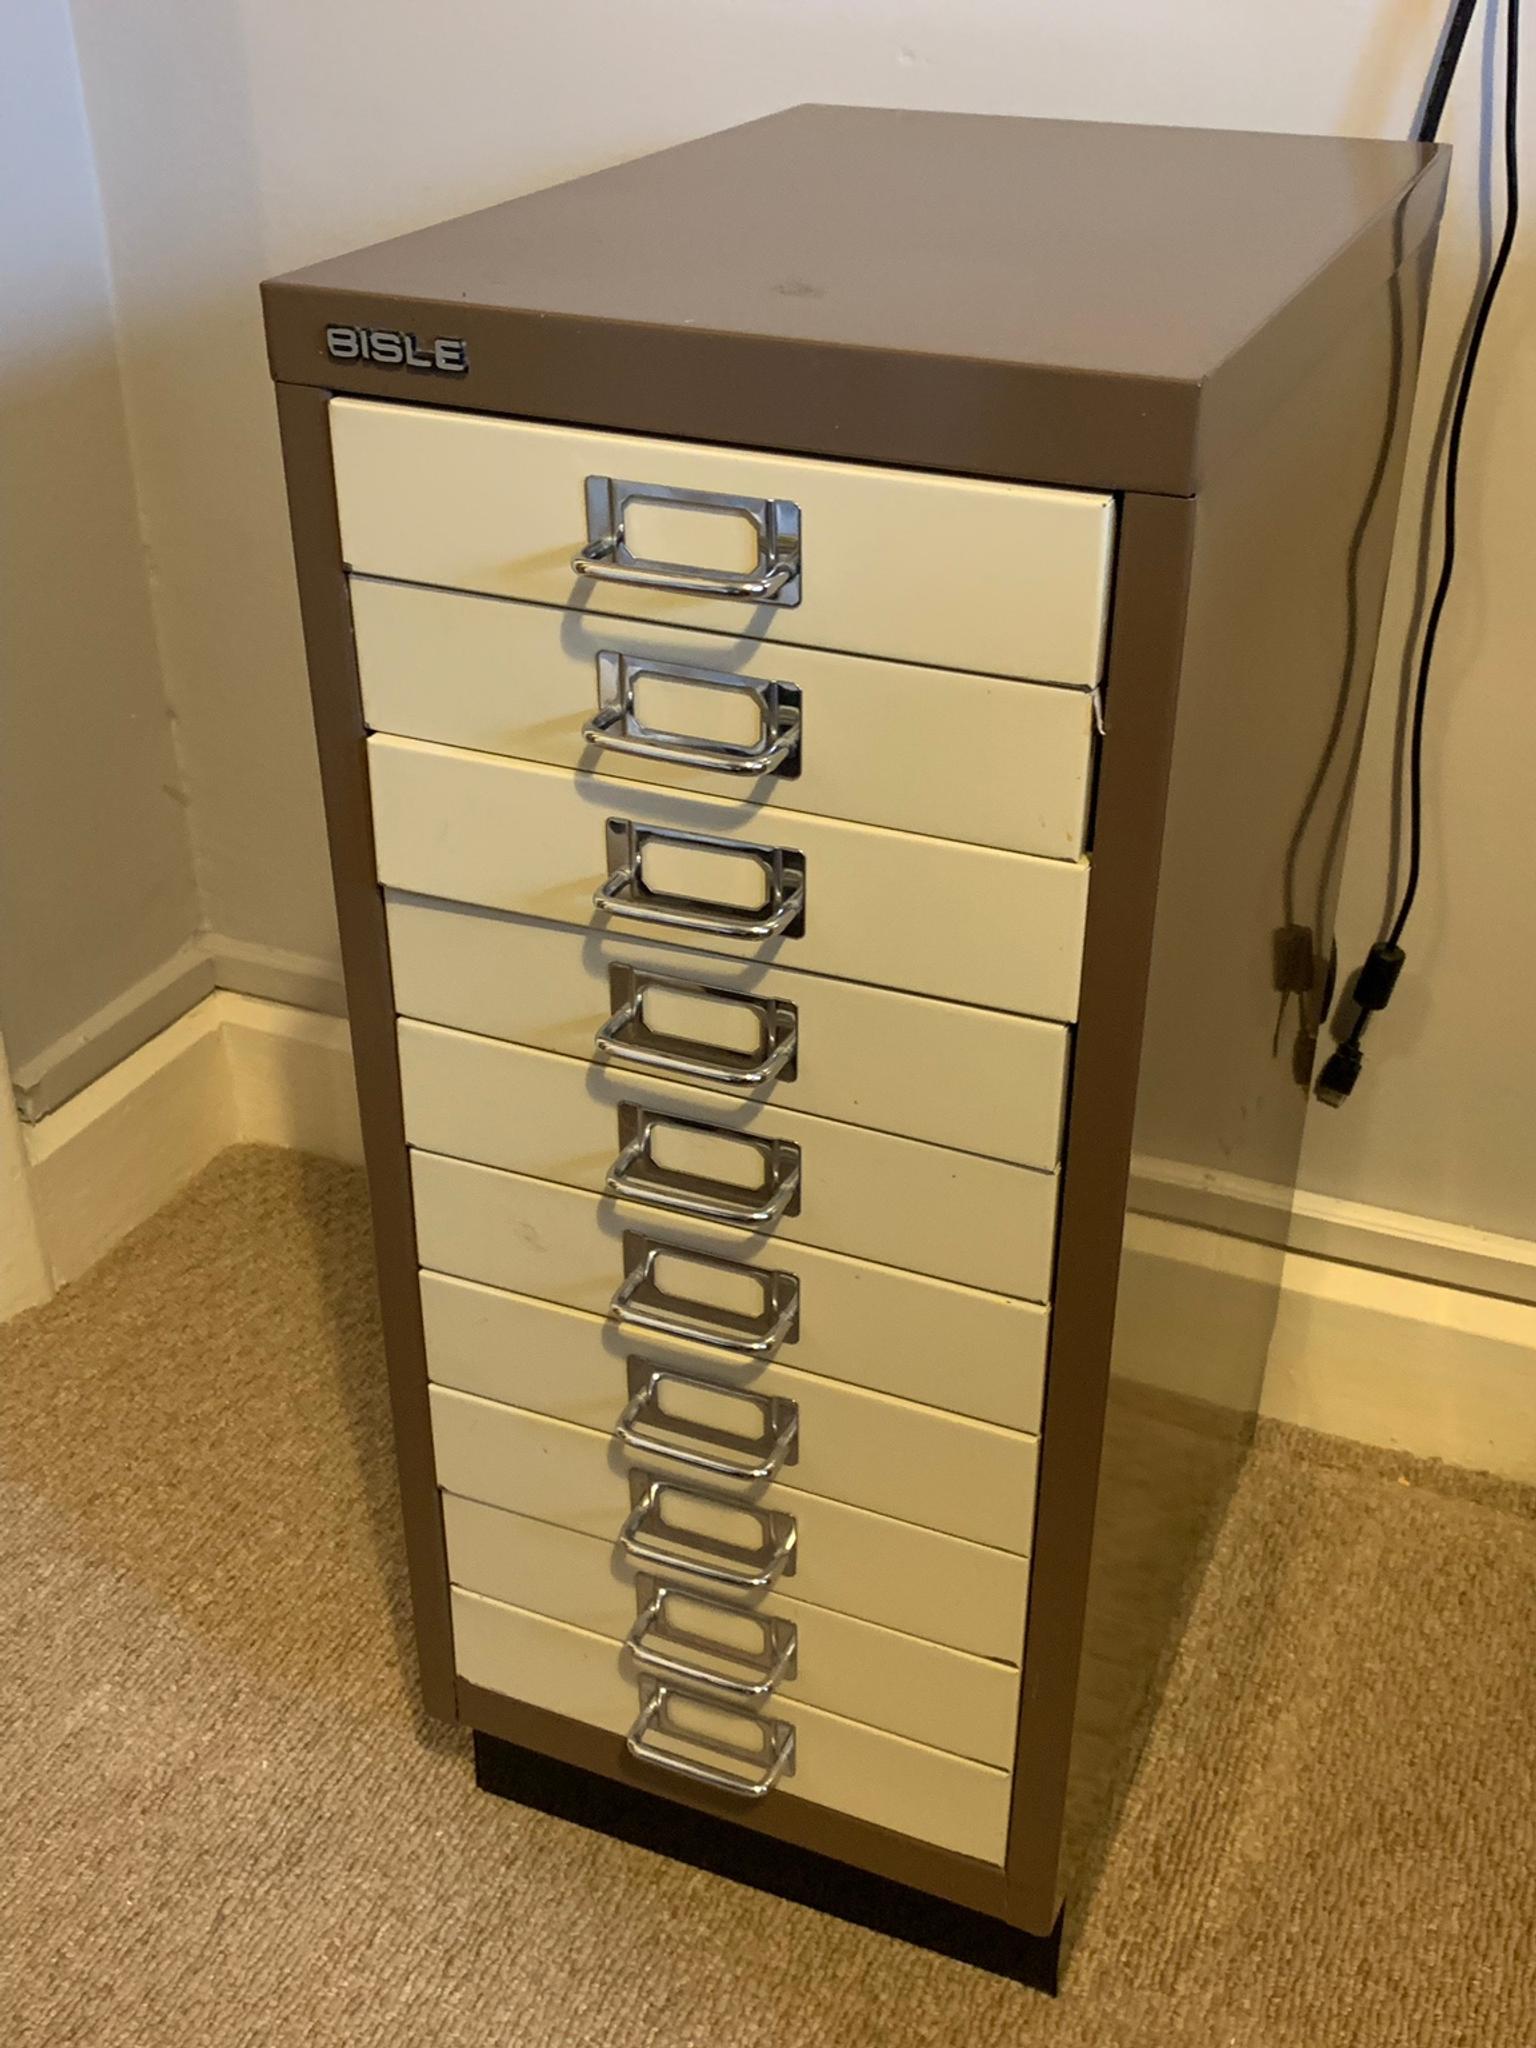 Bisley 10 Draw Metal Filing Cabinet In Britwell For 30 00 For